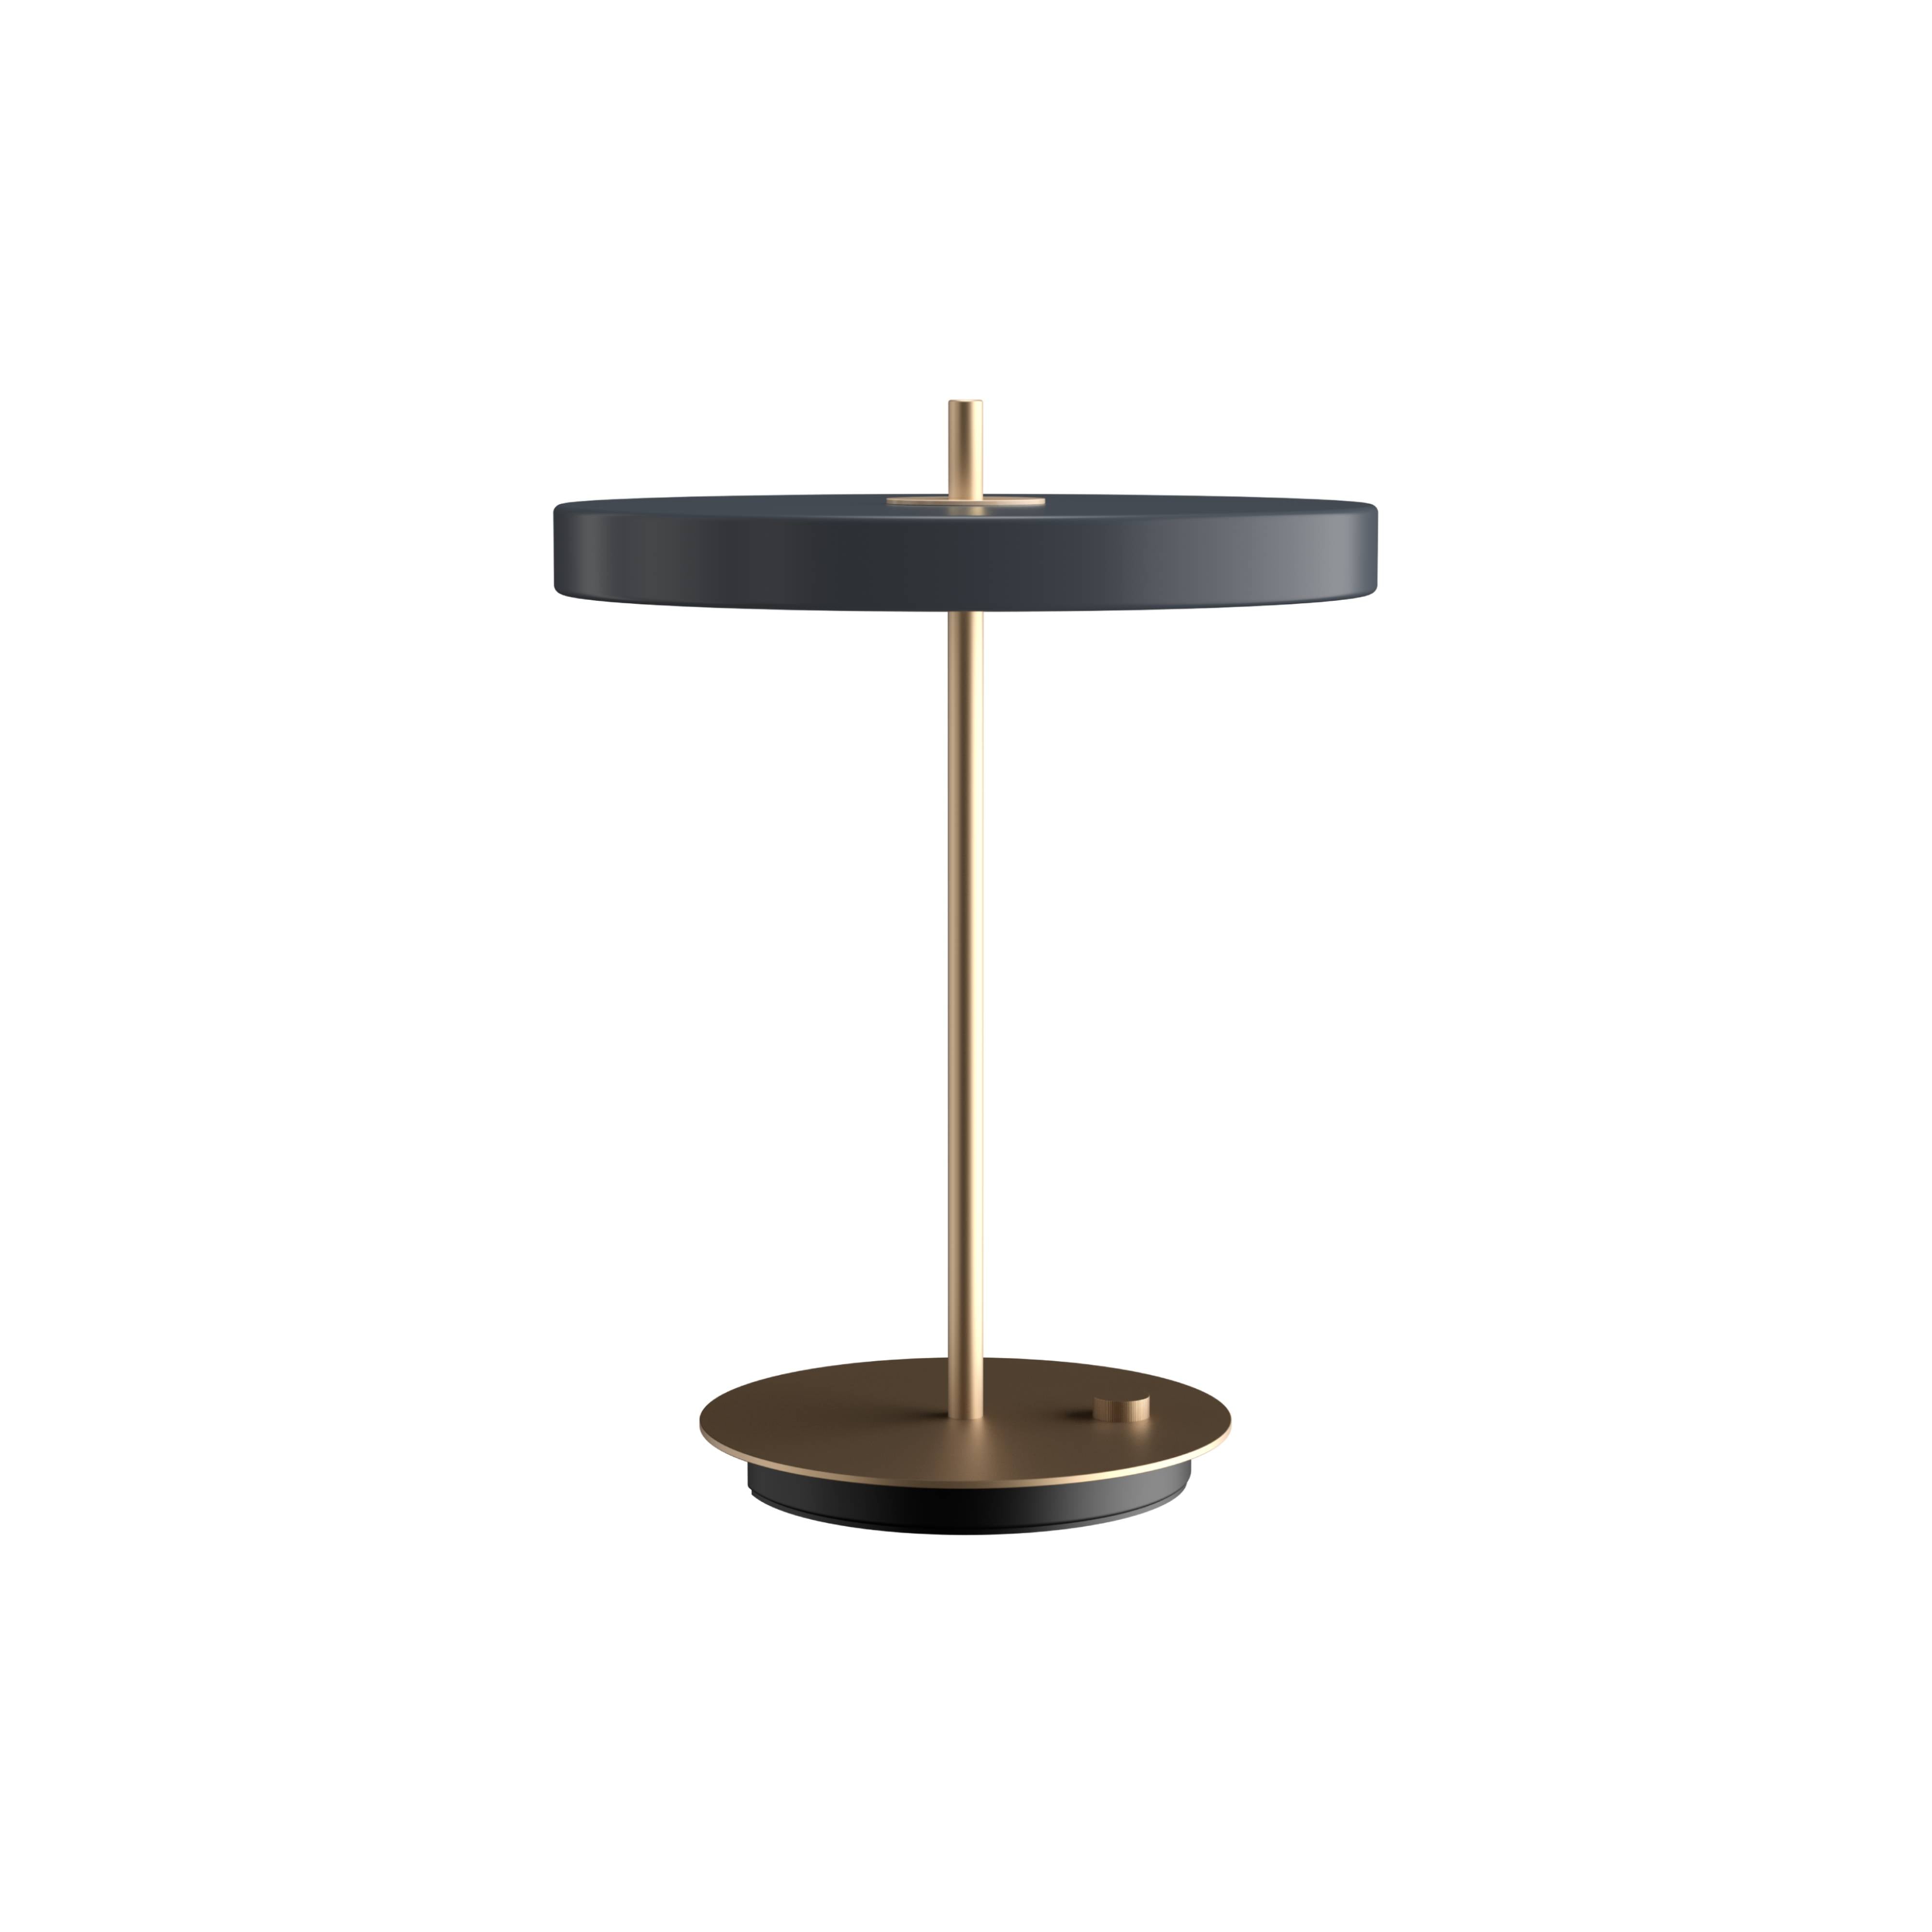 Asteria Table Lamp: Anthracite Grey